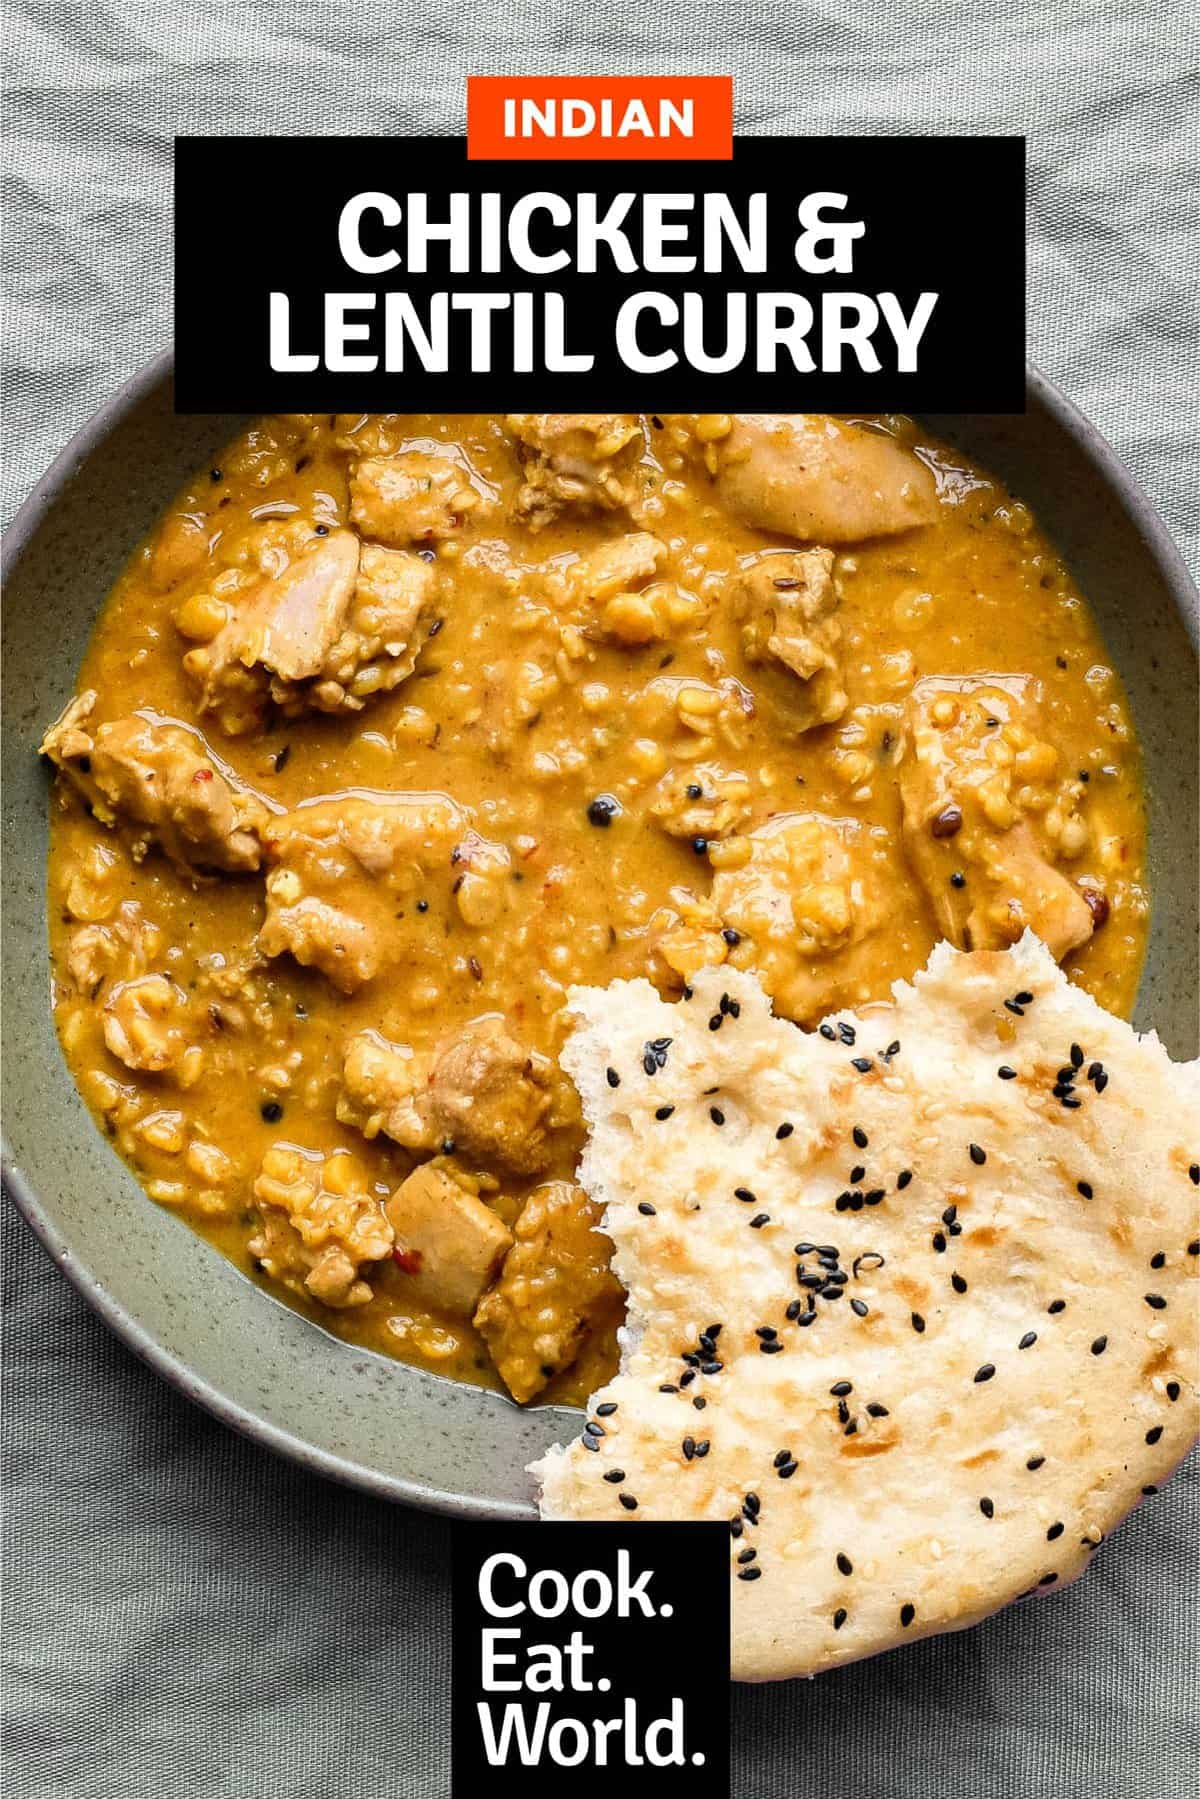 A bowl of lentil curry with a piece of naan bread